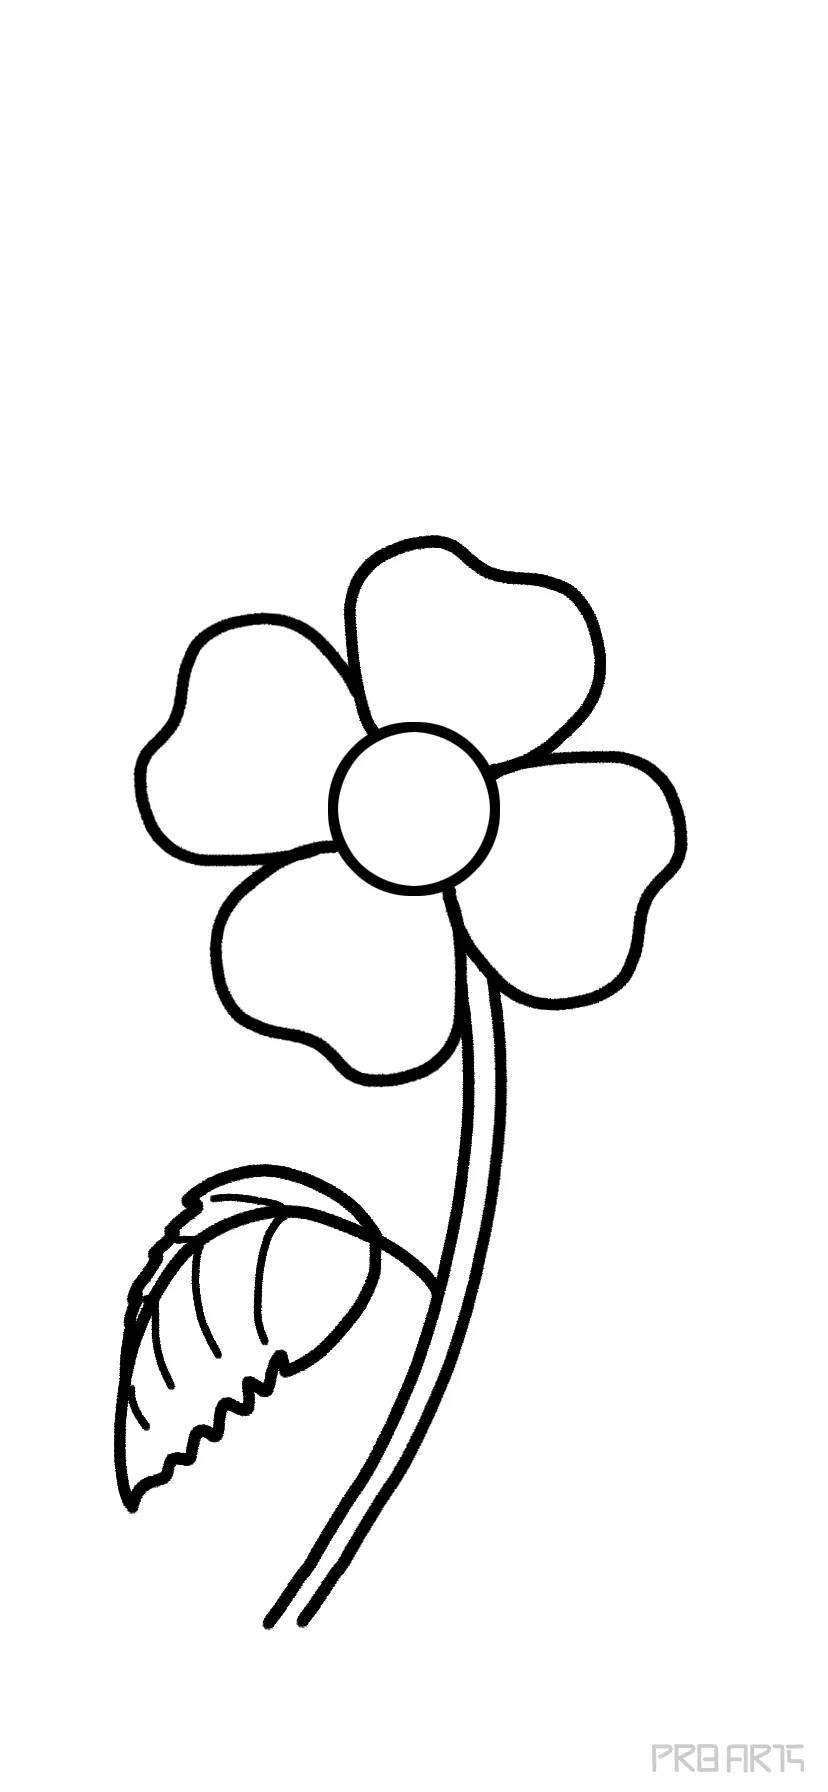 Hibiscus Flower Coloring Page With Detailed Line Art Vector Graphic And  Doodle Art Design Of Flower Outline Line Drawing And Black And White  Background. Royalty Free SVG, Cliparts, Vectors, and Stock Illustration.